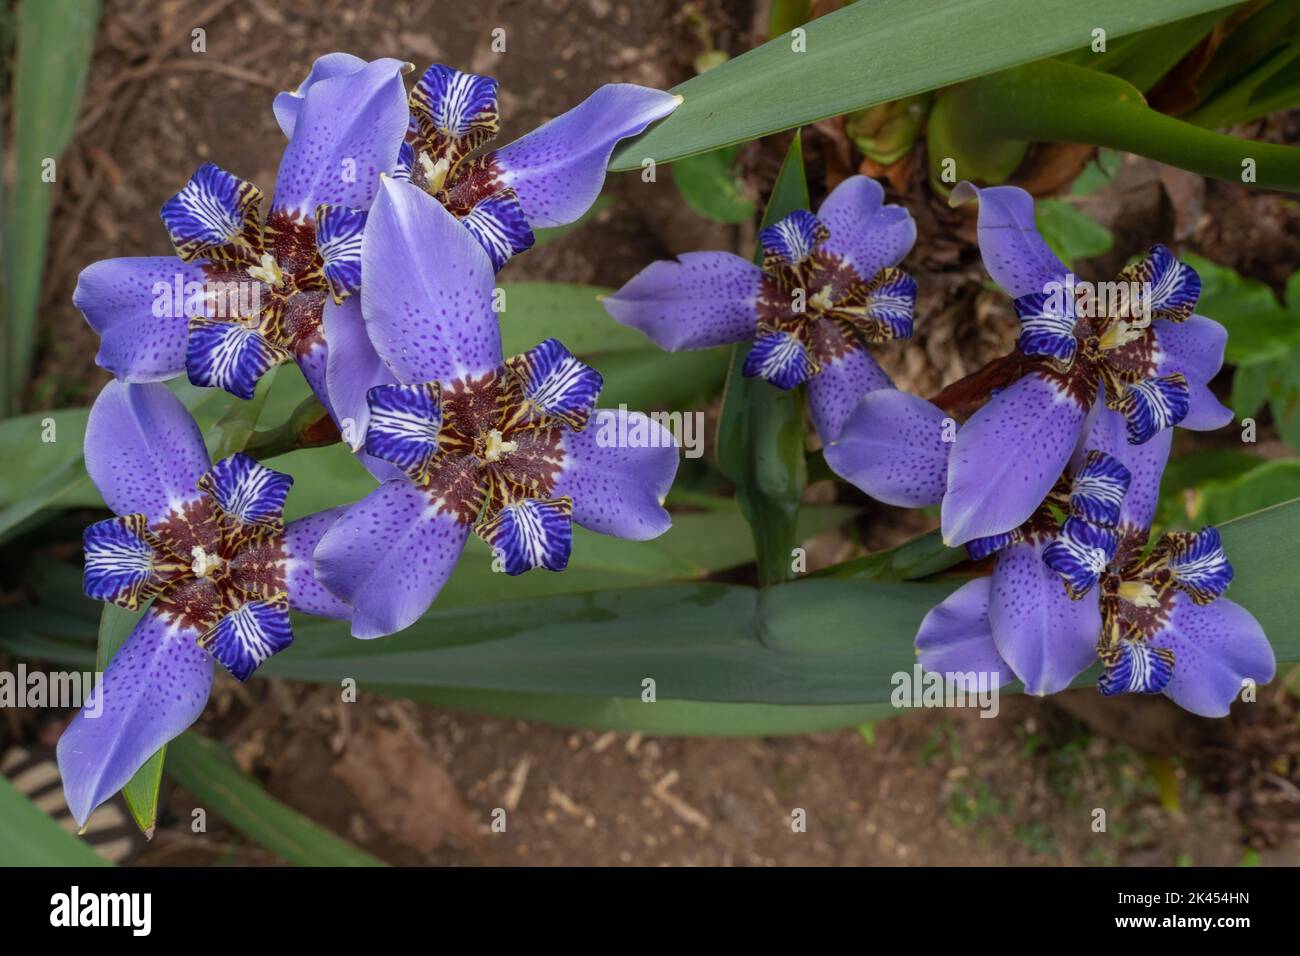 Closeup top view of colorful blue neomarica caerulea flowers aka walking iris or apostle's iris, blooming in garden outdoors on natural background Stock Photo